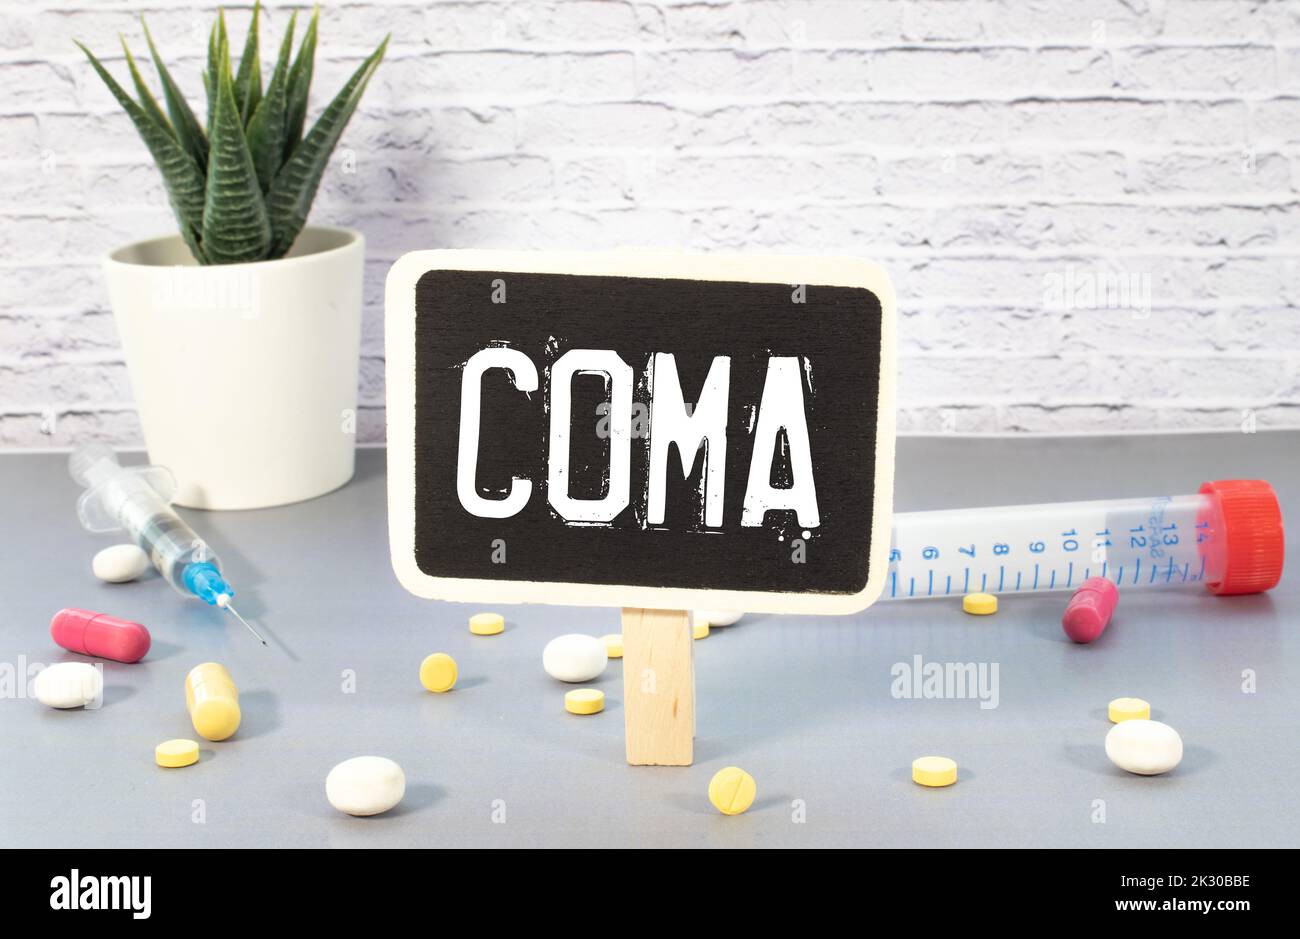 Card with word Coma, pills, gloves and surgical masks on wooden table, flat lay Stock Photo